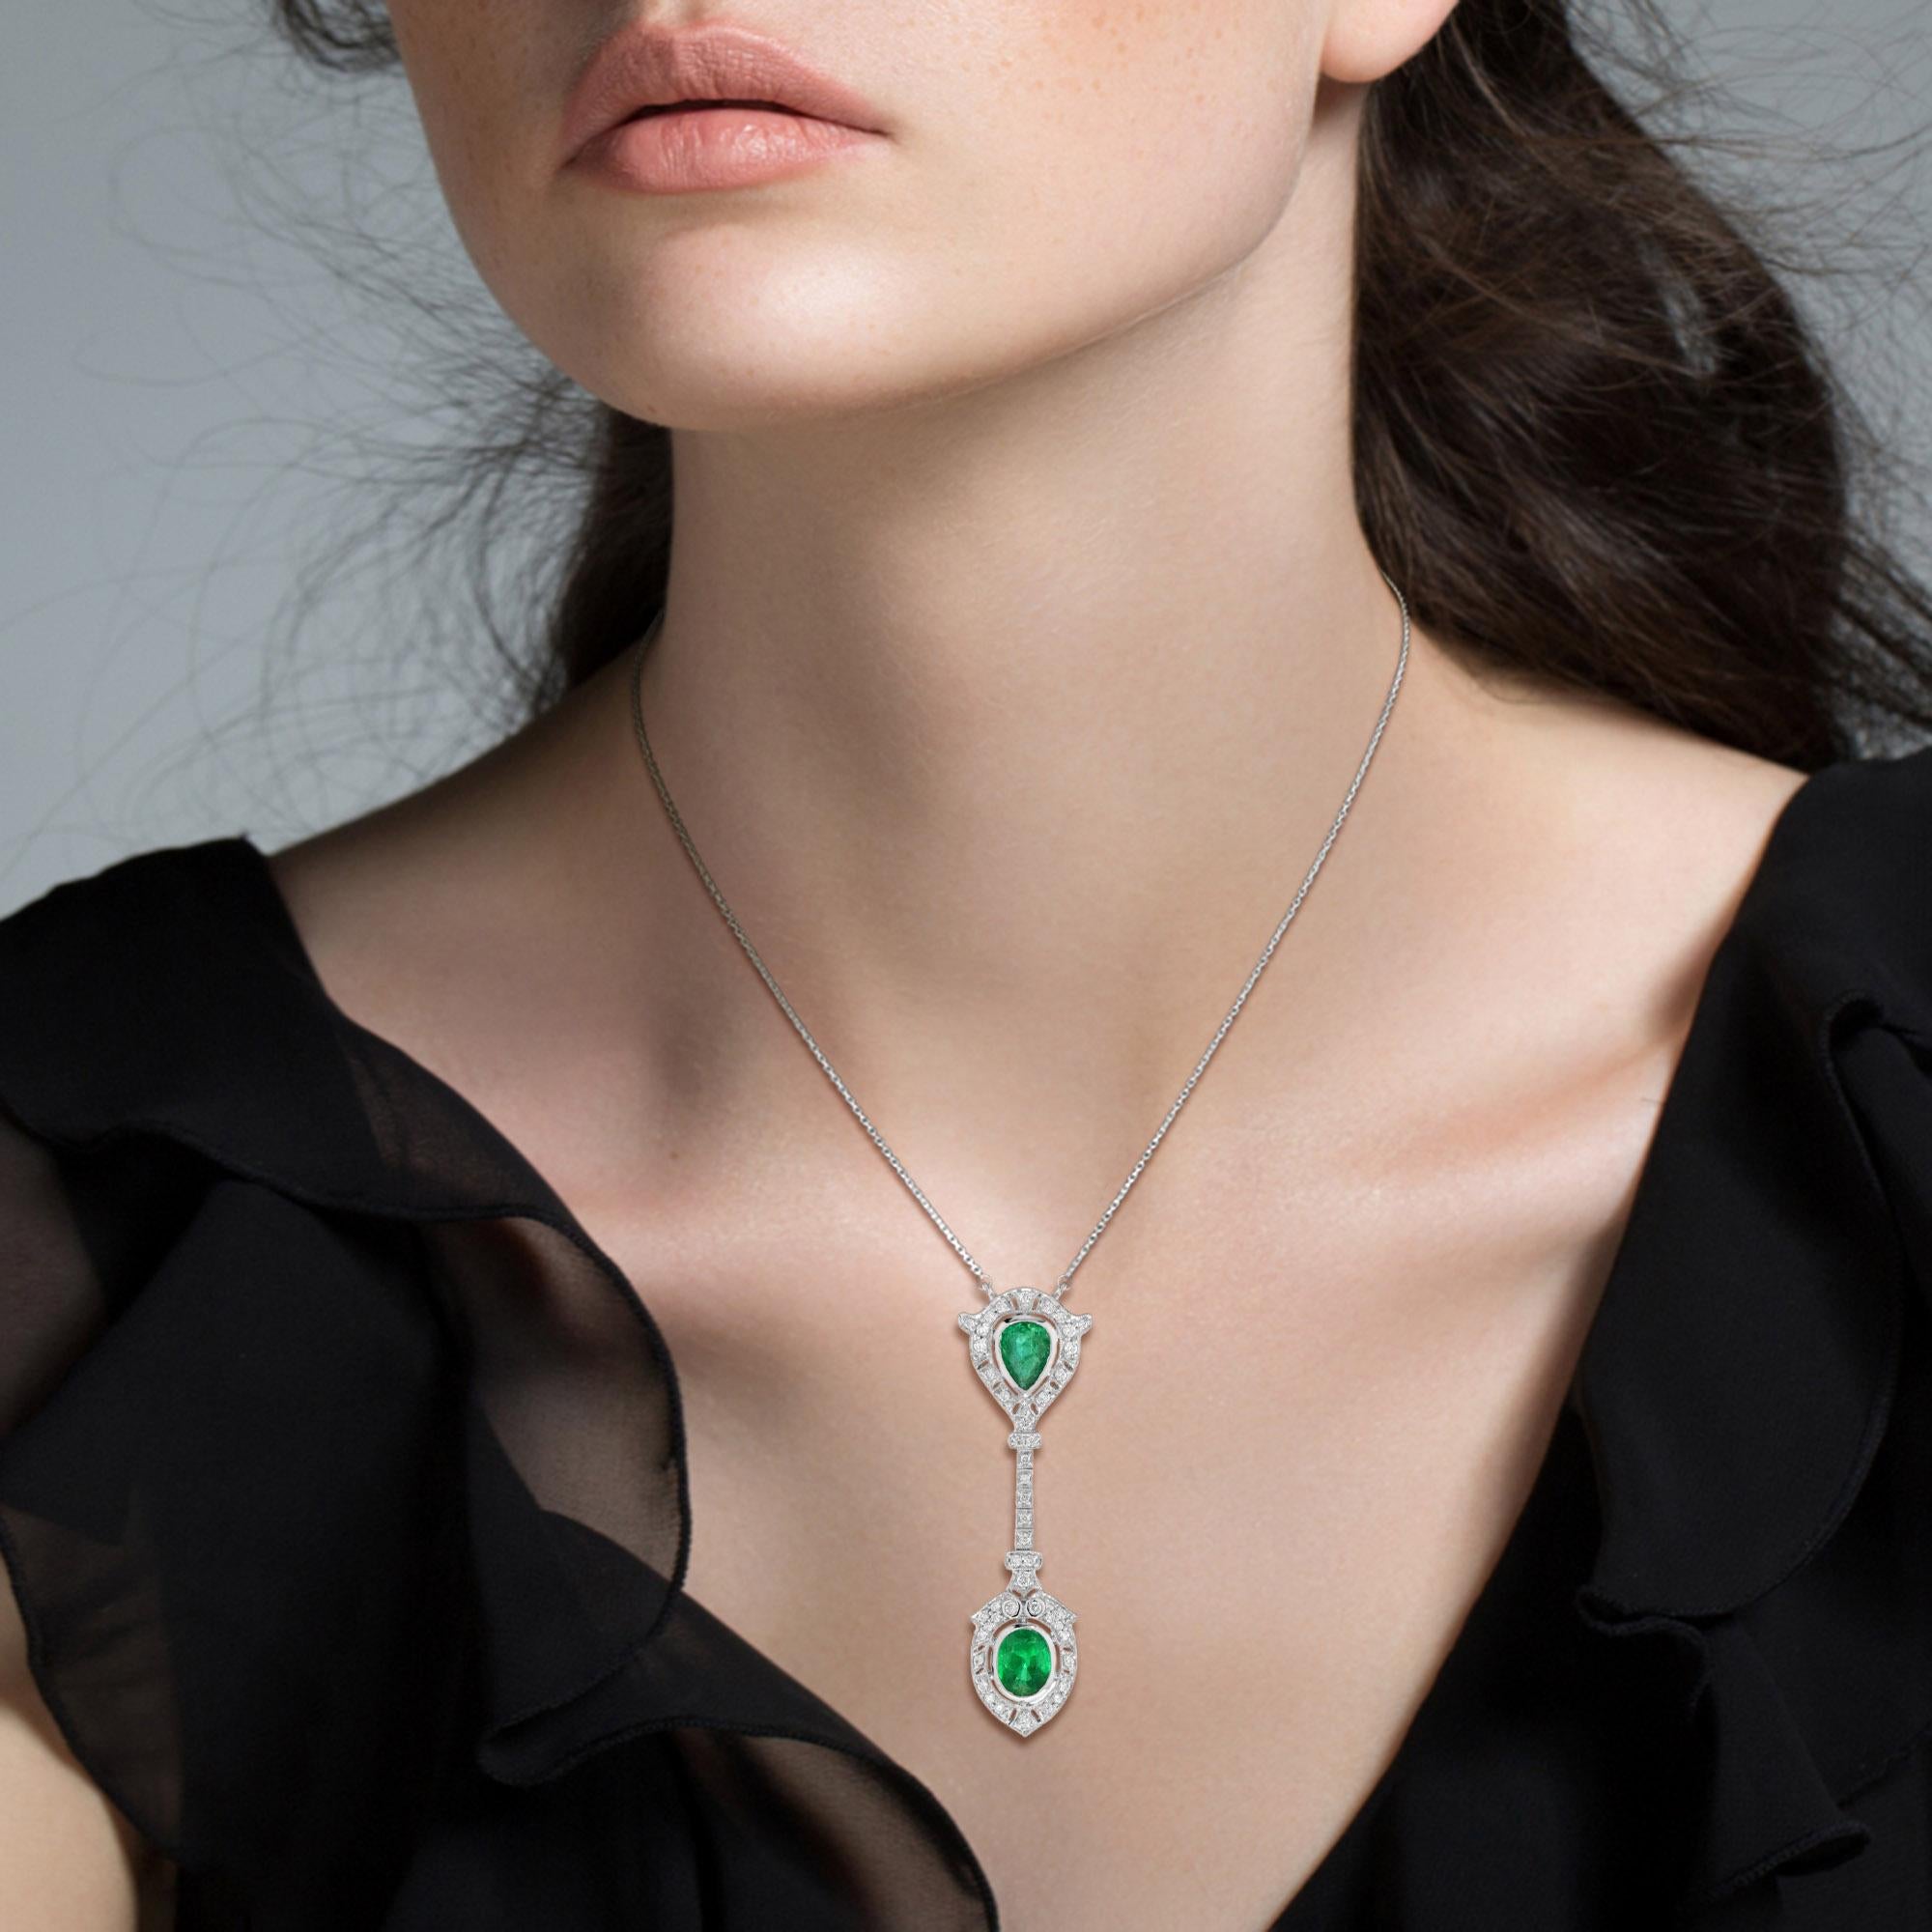 Exquisite elegance, this one-of-a-kind Art Deco inspired emerald and diamond necklace showcase 3.17 carats of vibrant pear and oval shaped emeralds surrounded by old cut diamonds set in 18k white gold with a matching chain necklace. Captivating and